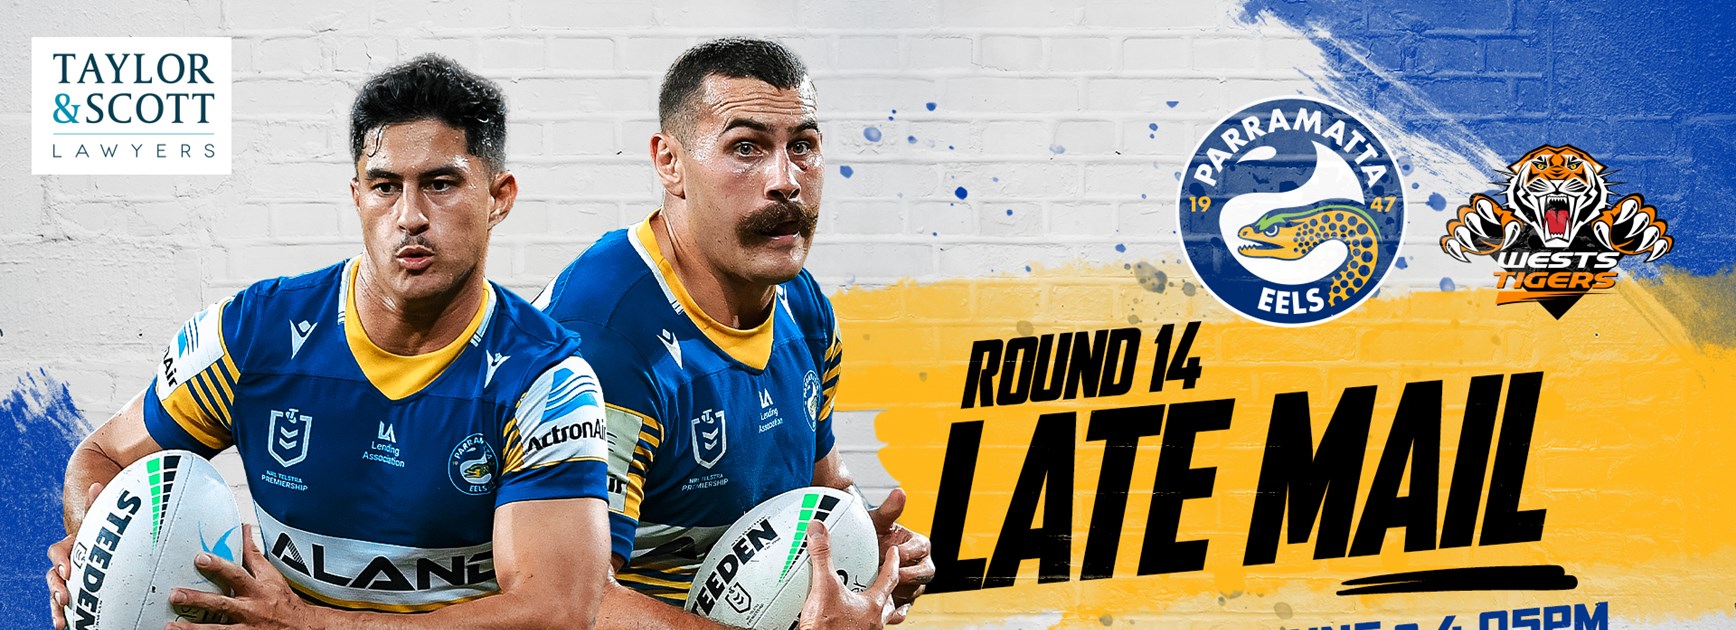 Late Mail - Eels v Wests Tigers, Round 14